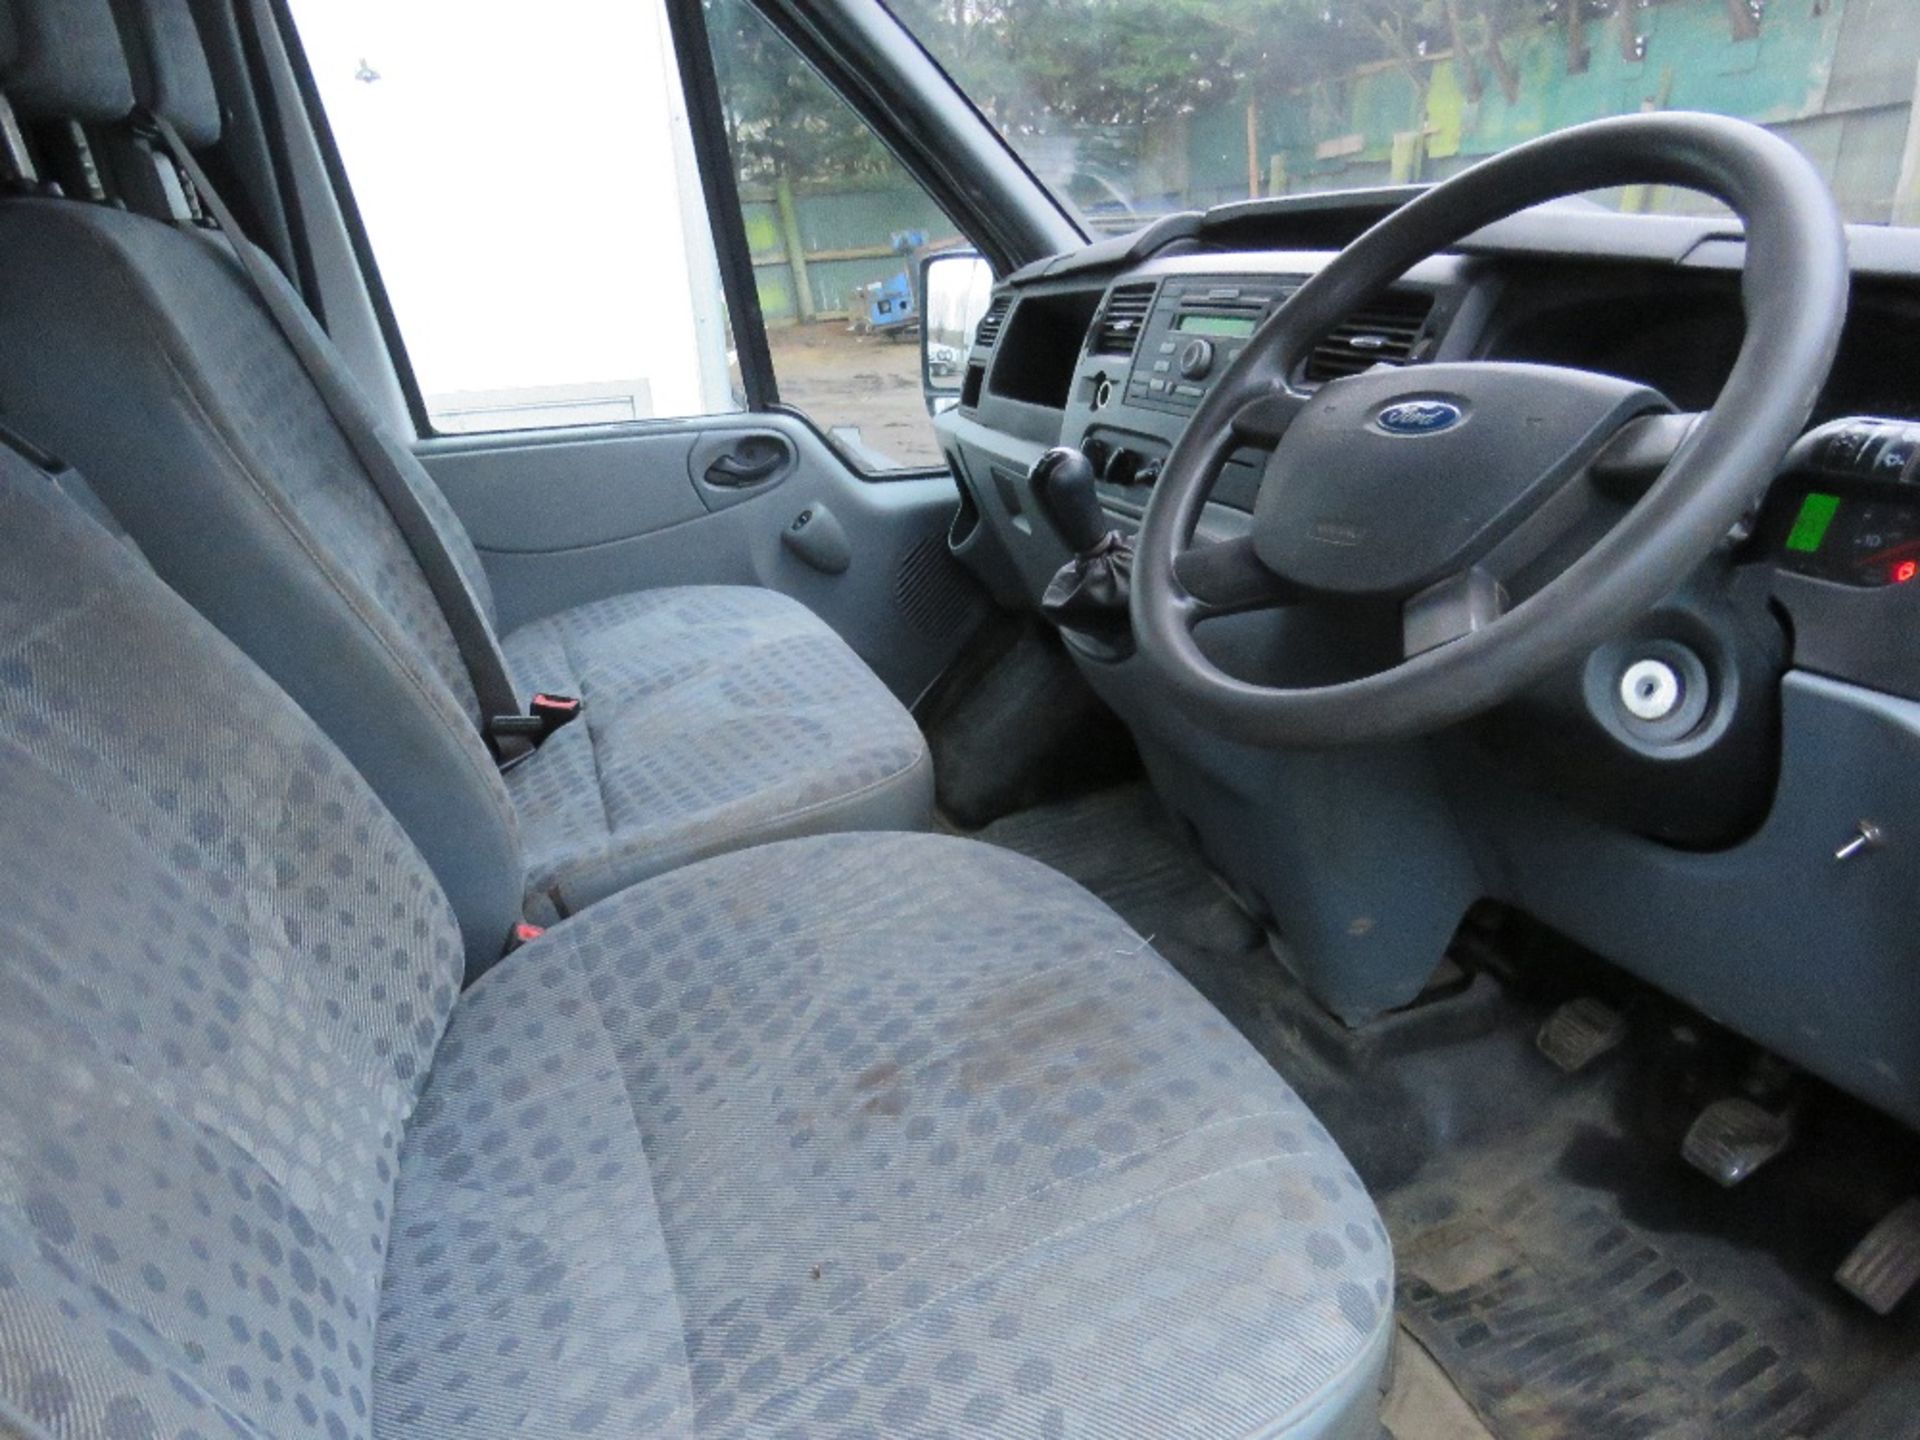 FORD TRANSIT 85 T260M FWD PANEL VAN REG:KR58 ZHZ. 150,769 REC HRS. DIRECT FROM LOCAL COMPANY SELLING - Image 9 of 15